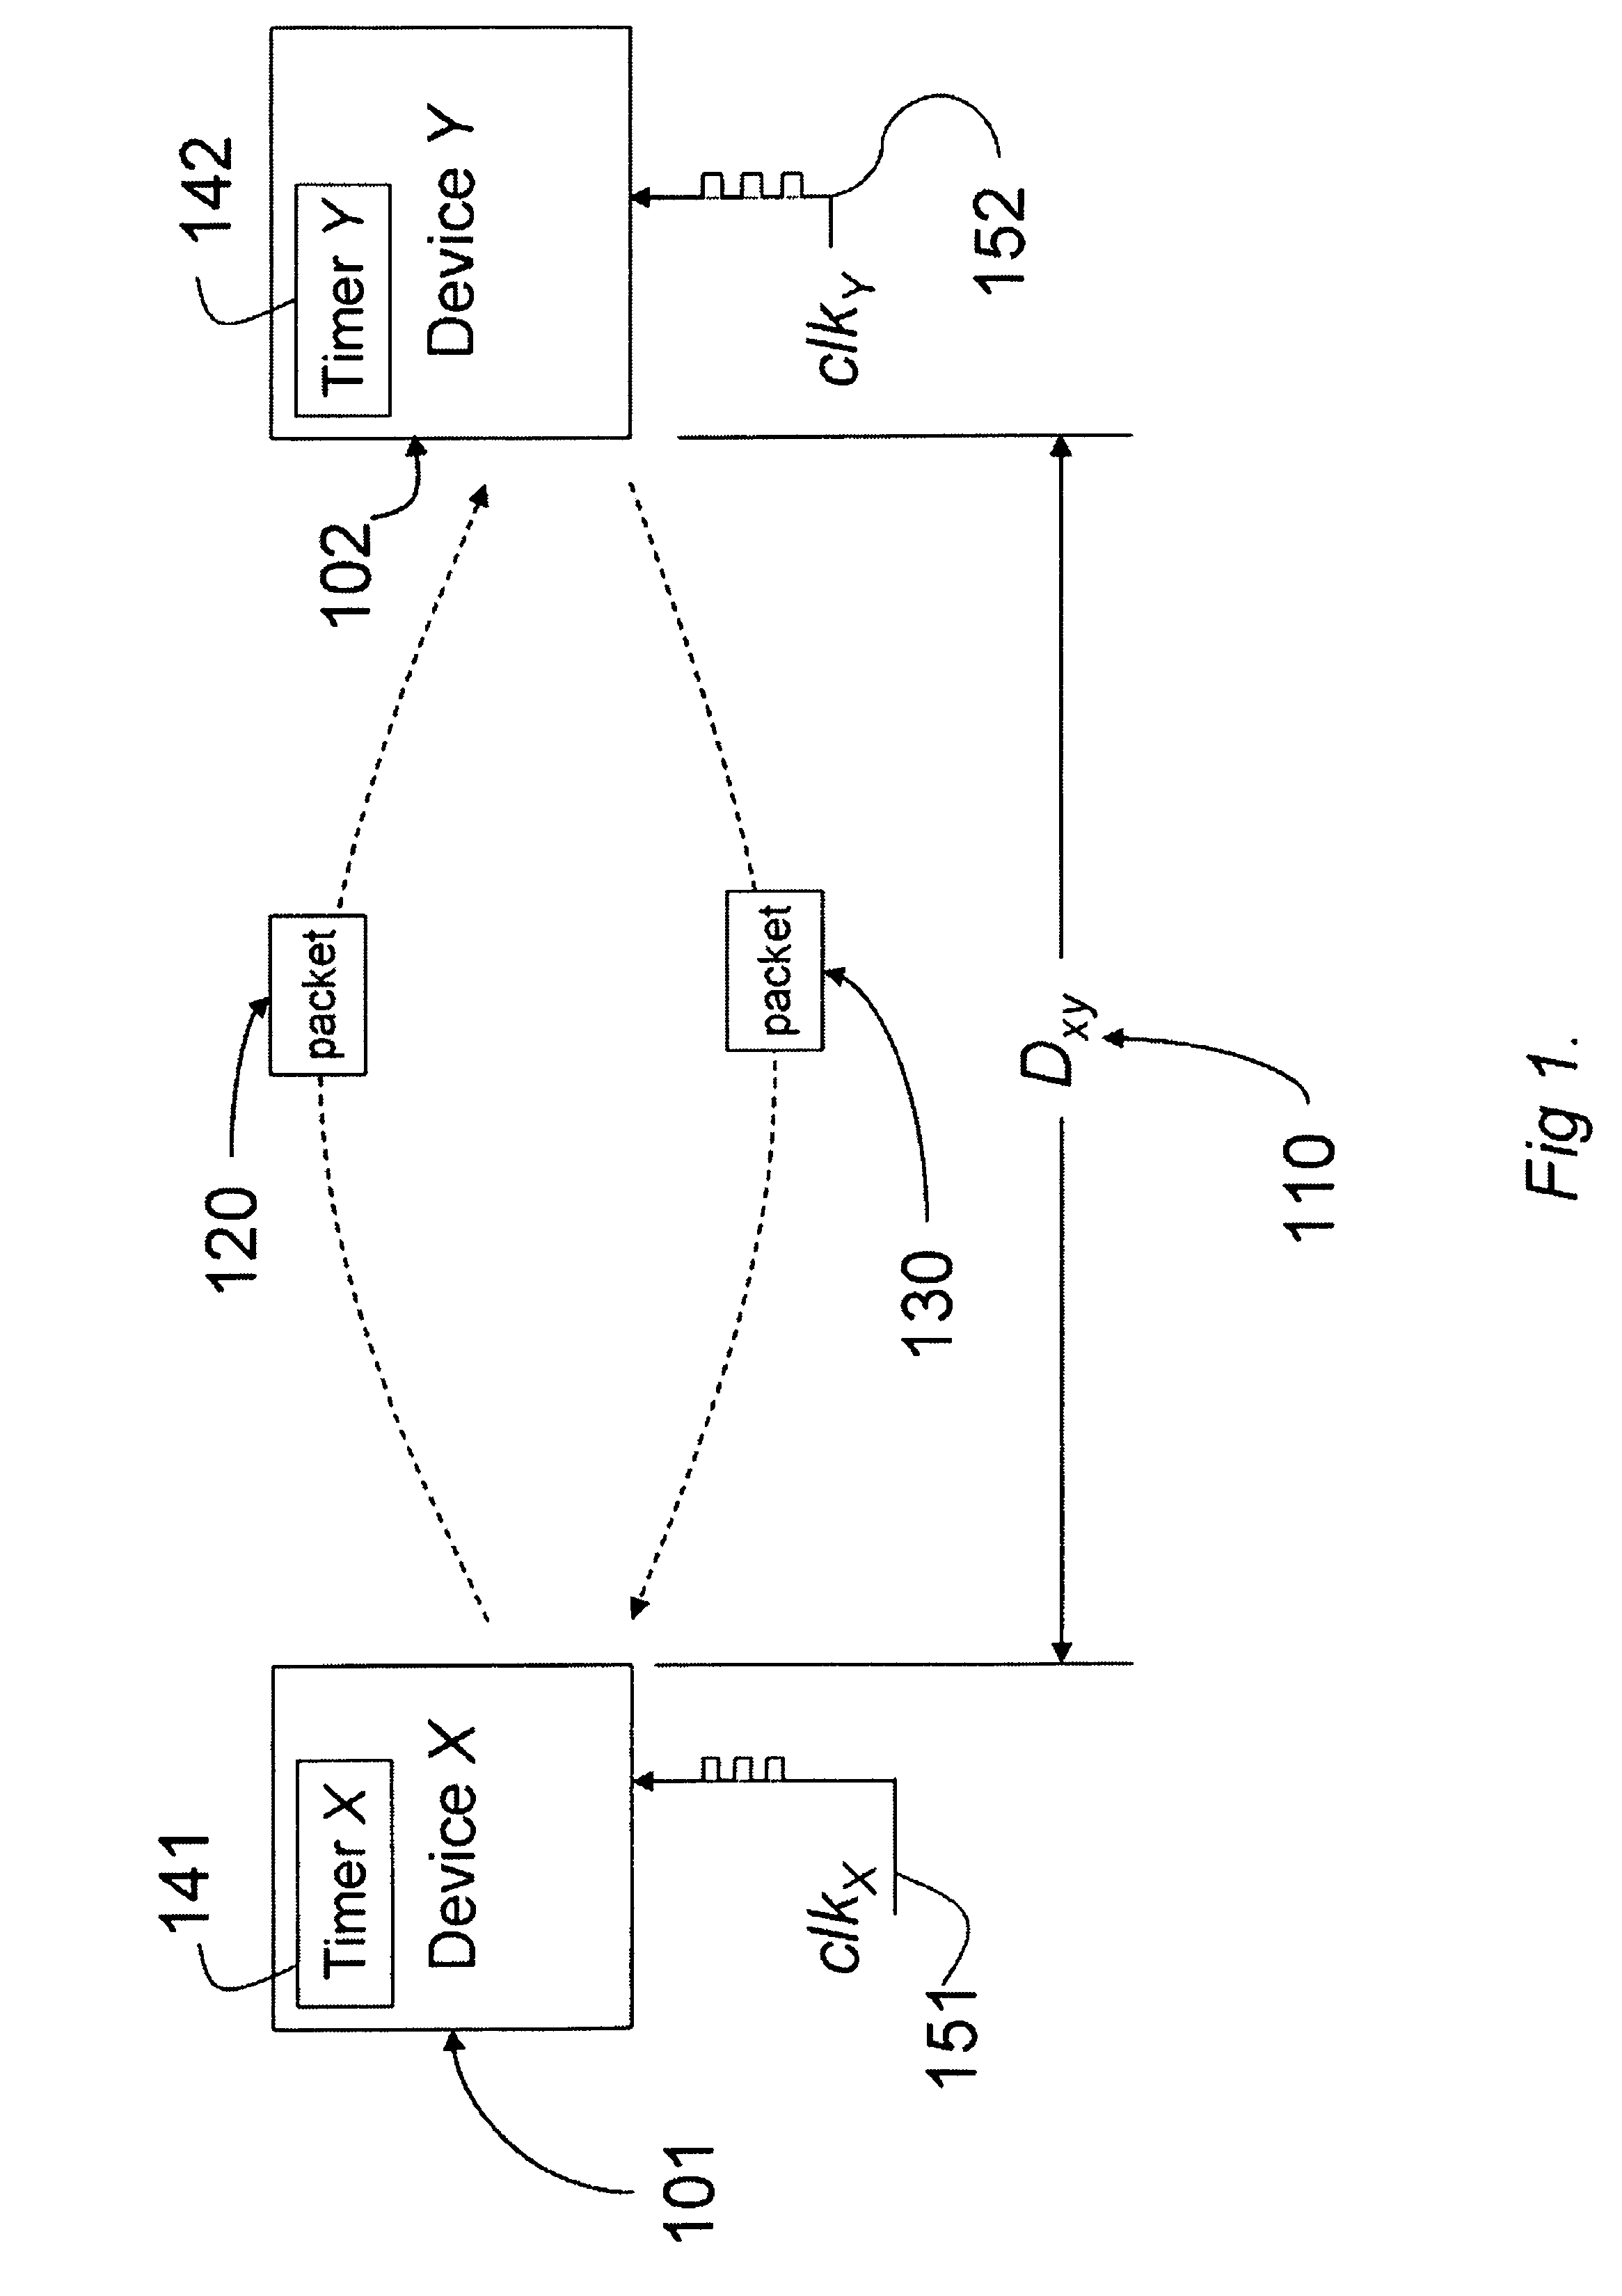 Method for estimating relative clock frequency offsets to improve radio ranging errors